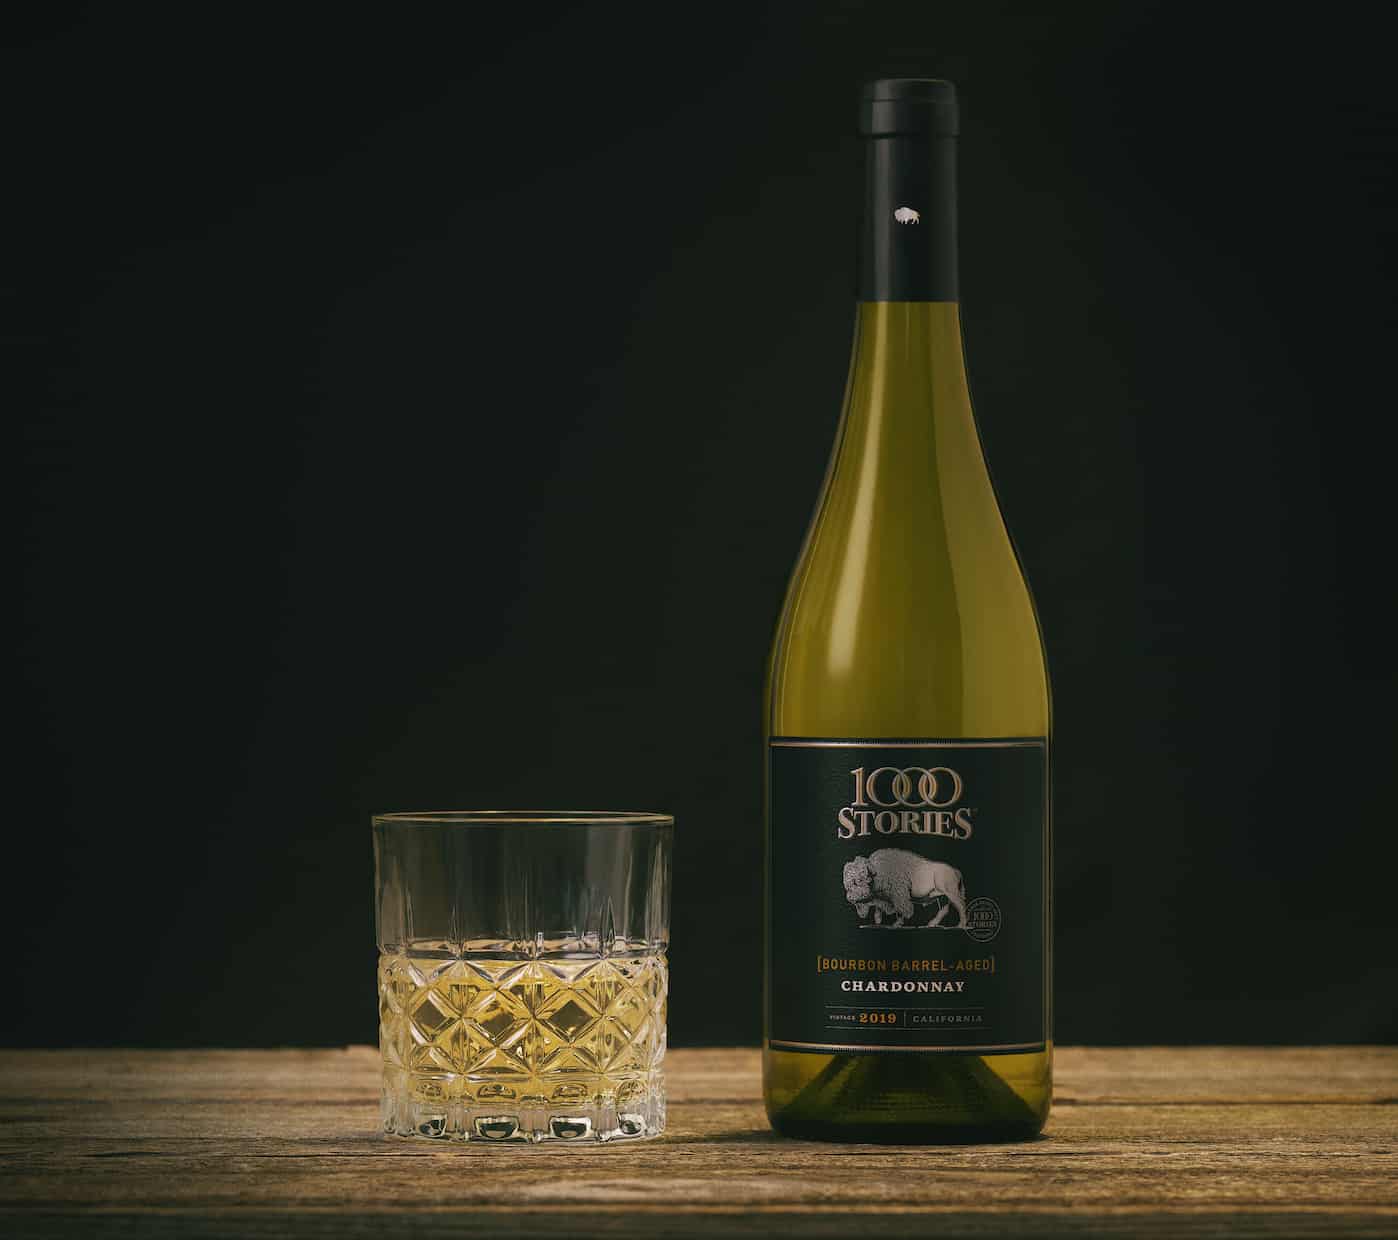 A glass of white wine sits next to a bottle of 1000 Stories Chardonnay